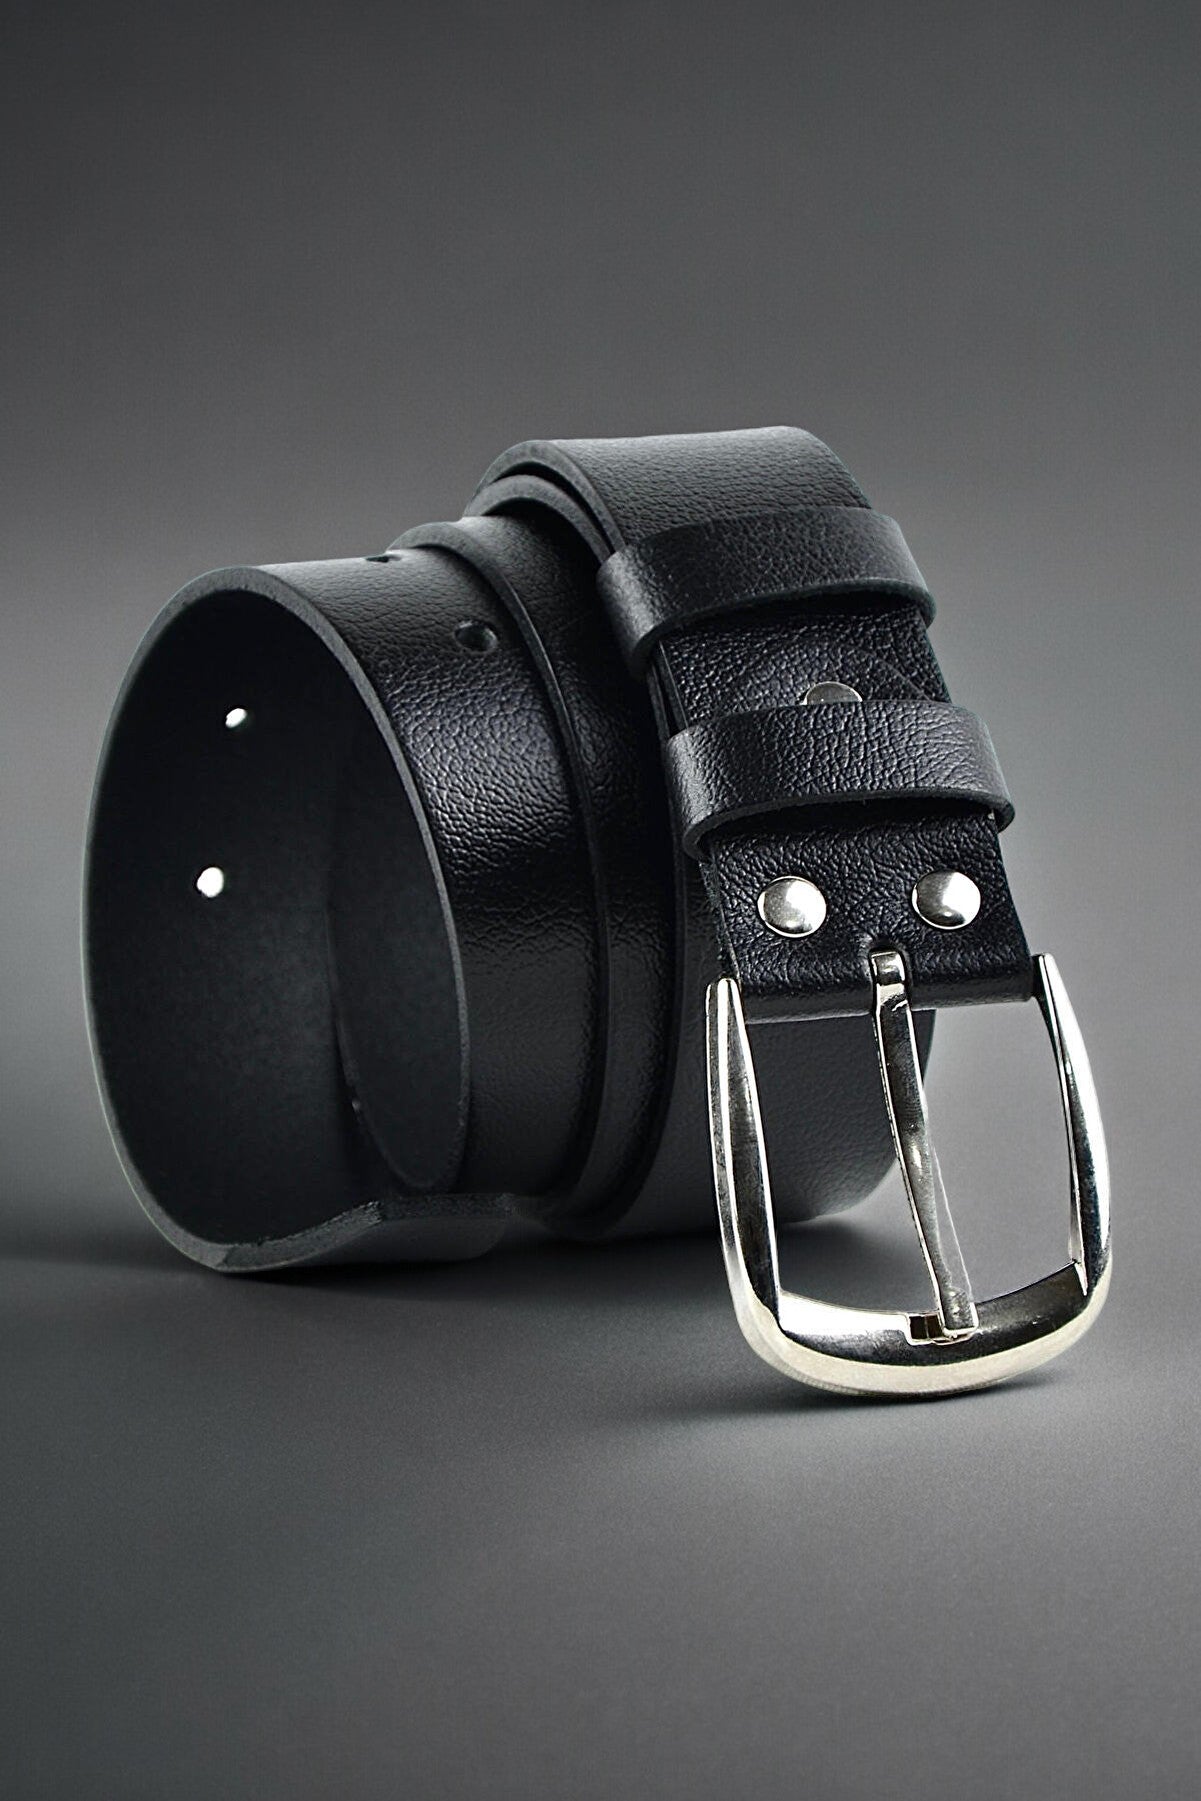 Handmade Leather Belt with Different Color Options  99percenthandmade 32" - 34" Waist inches (70cm-80cm)-Small Black 